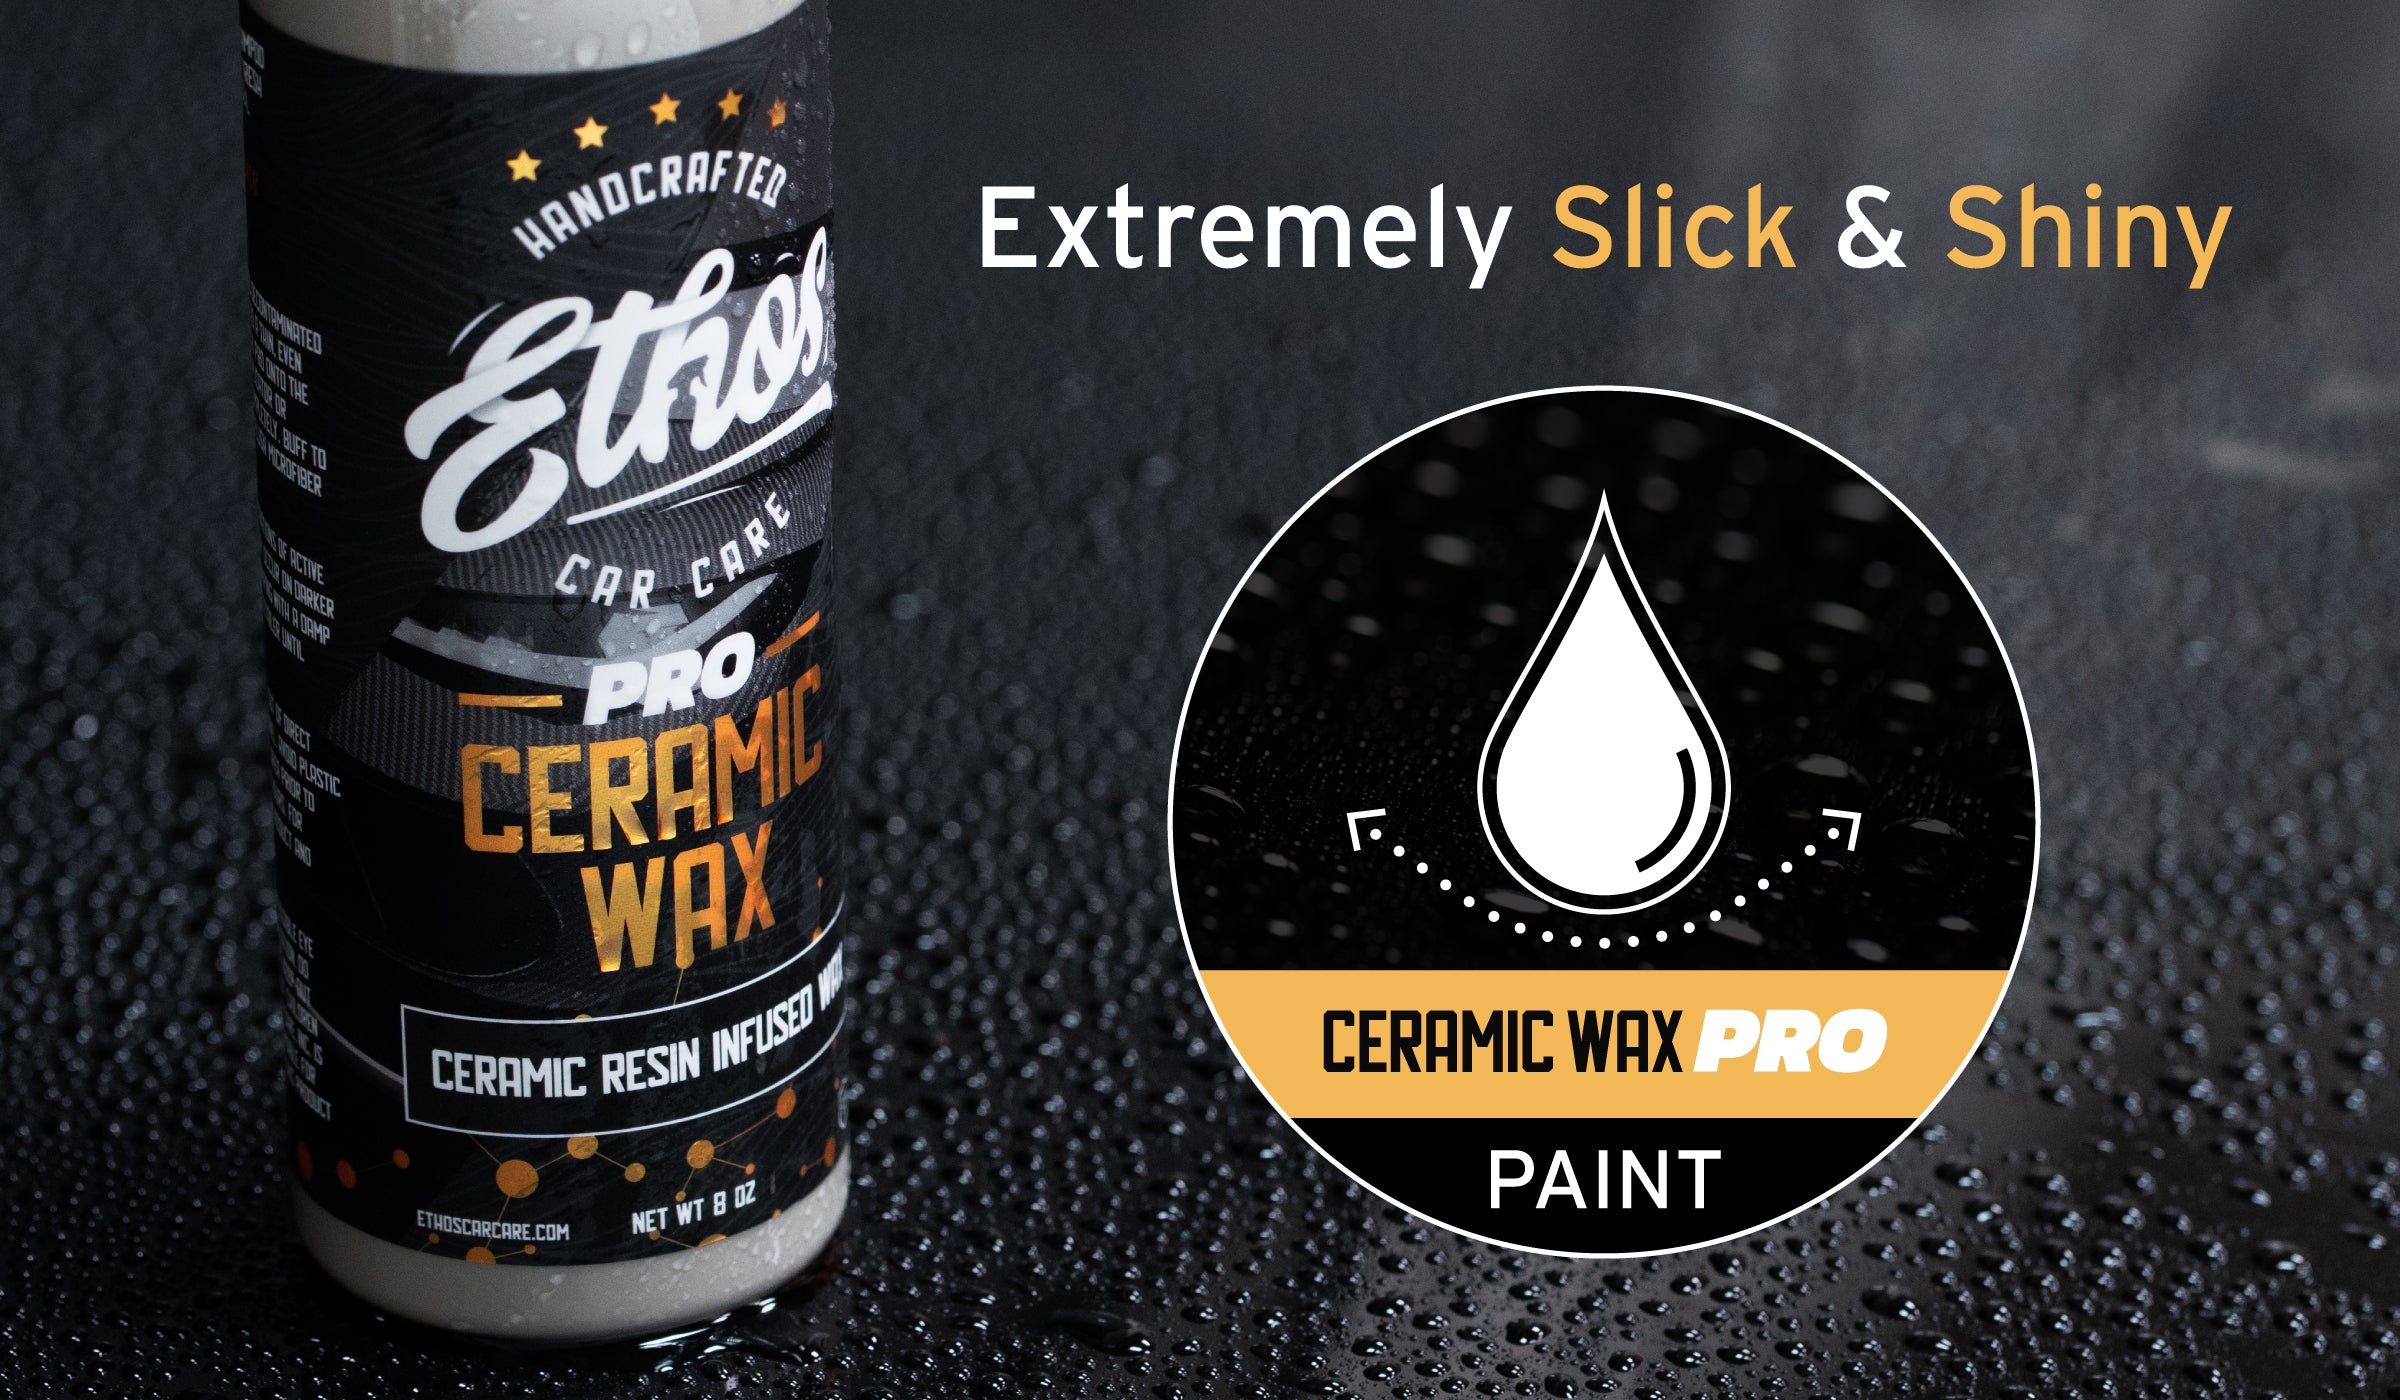 Ethos Interior Detailer - Easily Cleans and Protects All Interior Surfaces | Non Greasy Satin Finish with UV Protection and Odor Neutralizing Agents